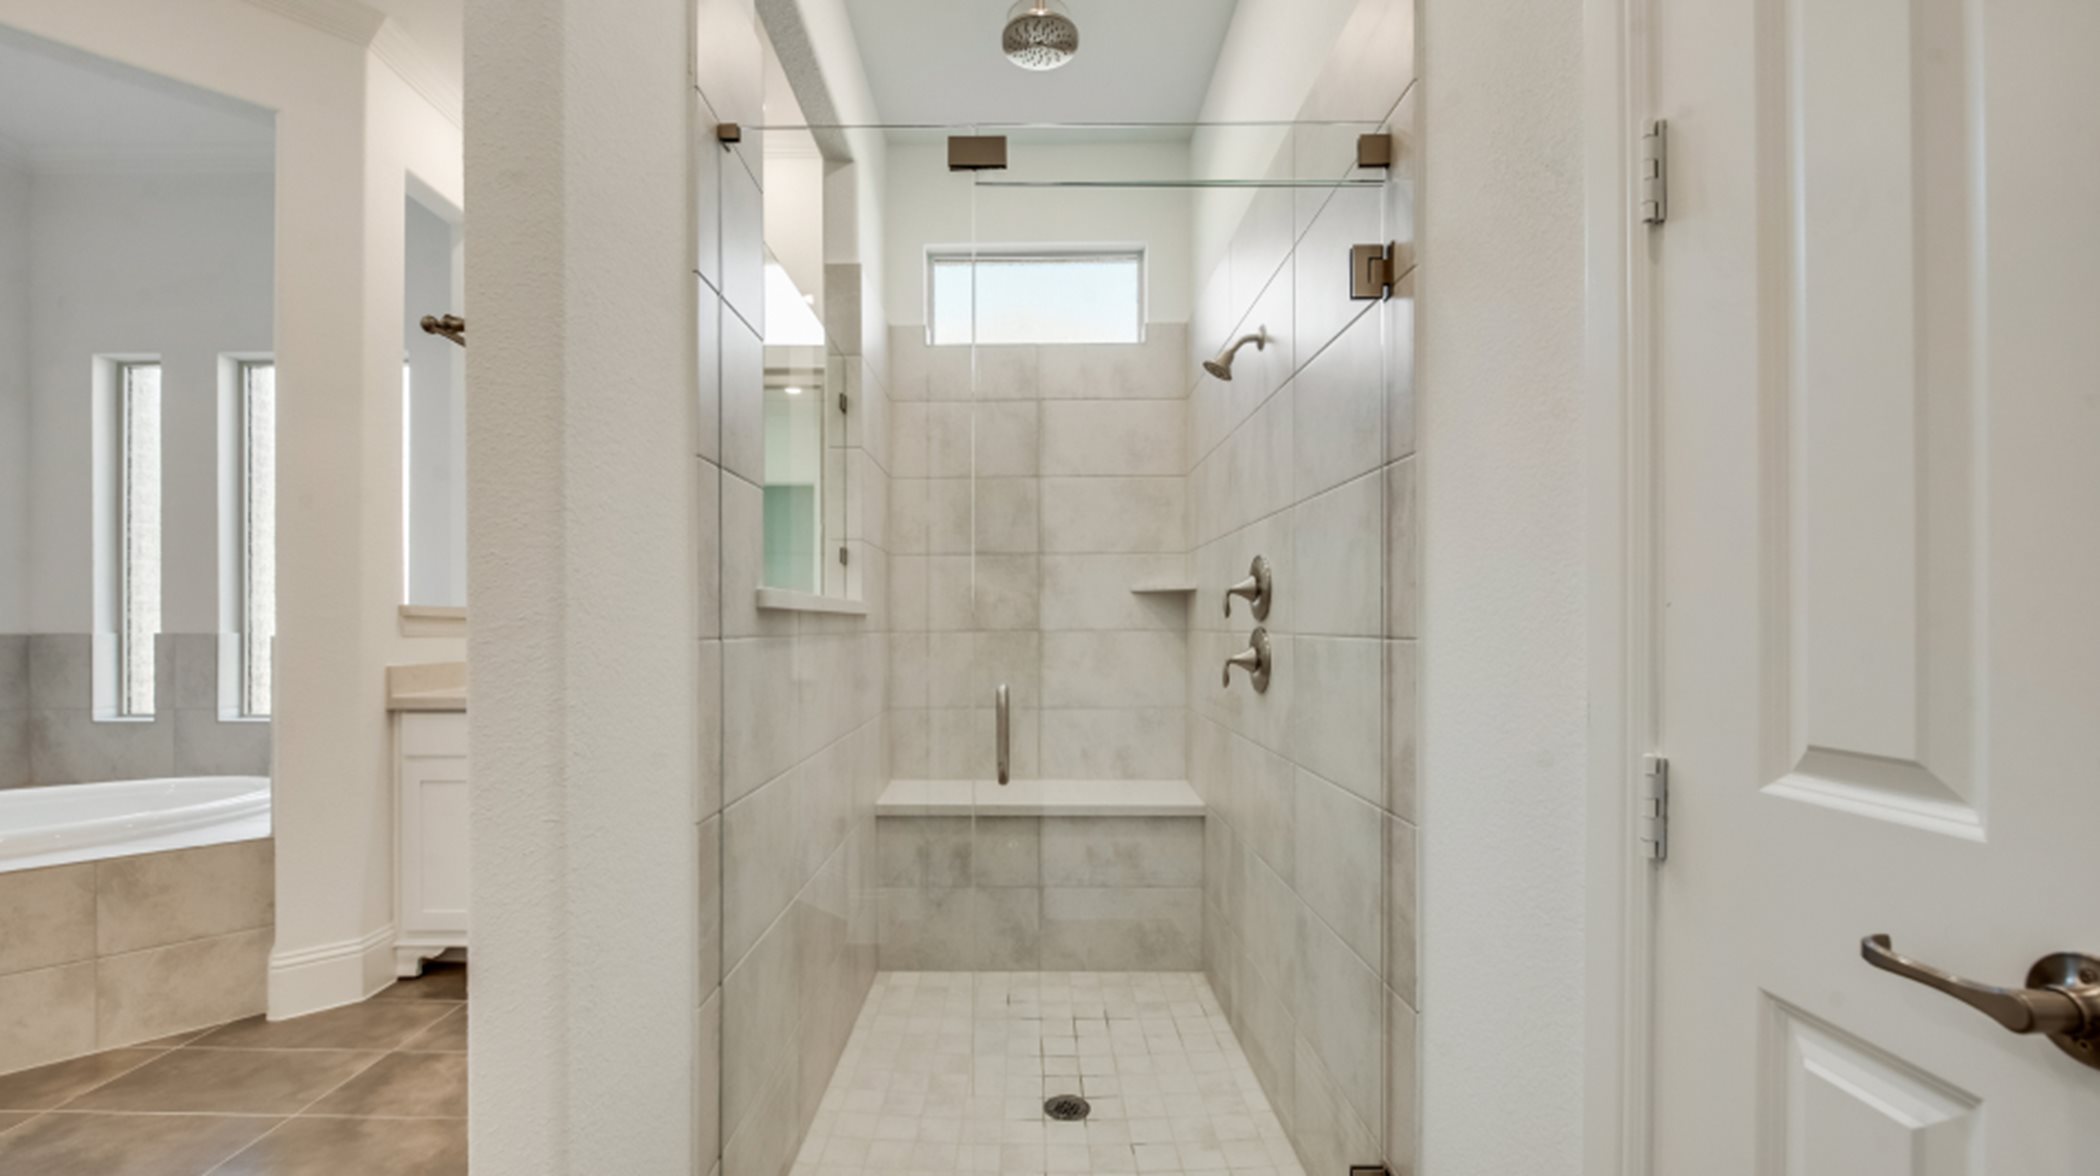 Walk-in shower with framed glass enclosure and built-in seating